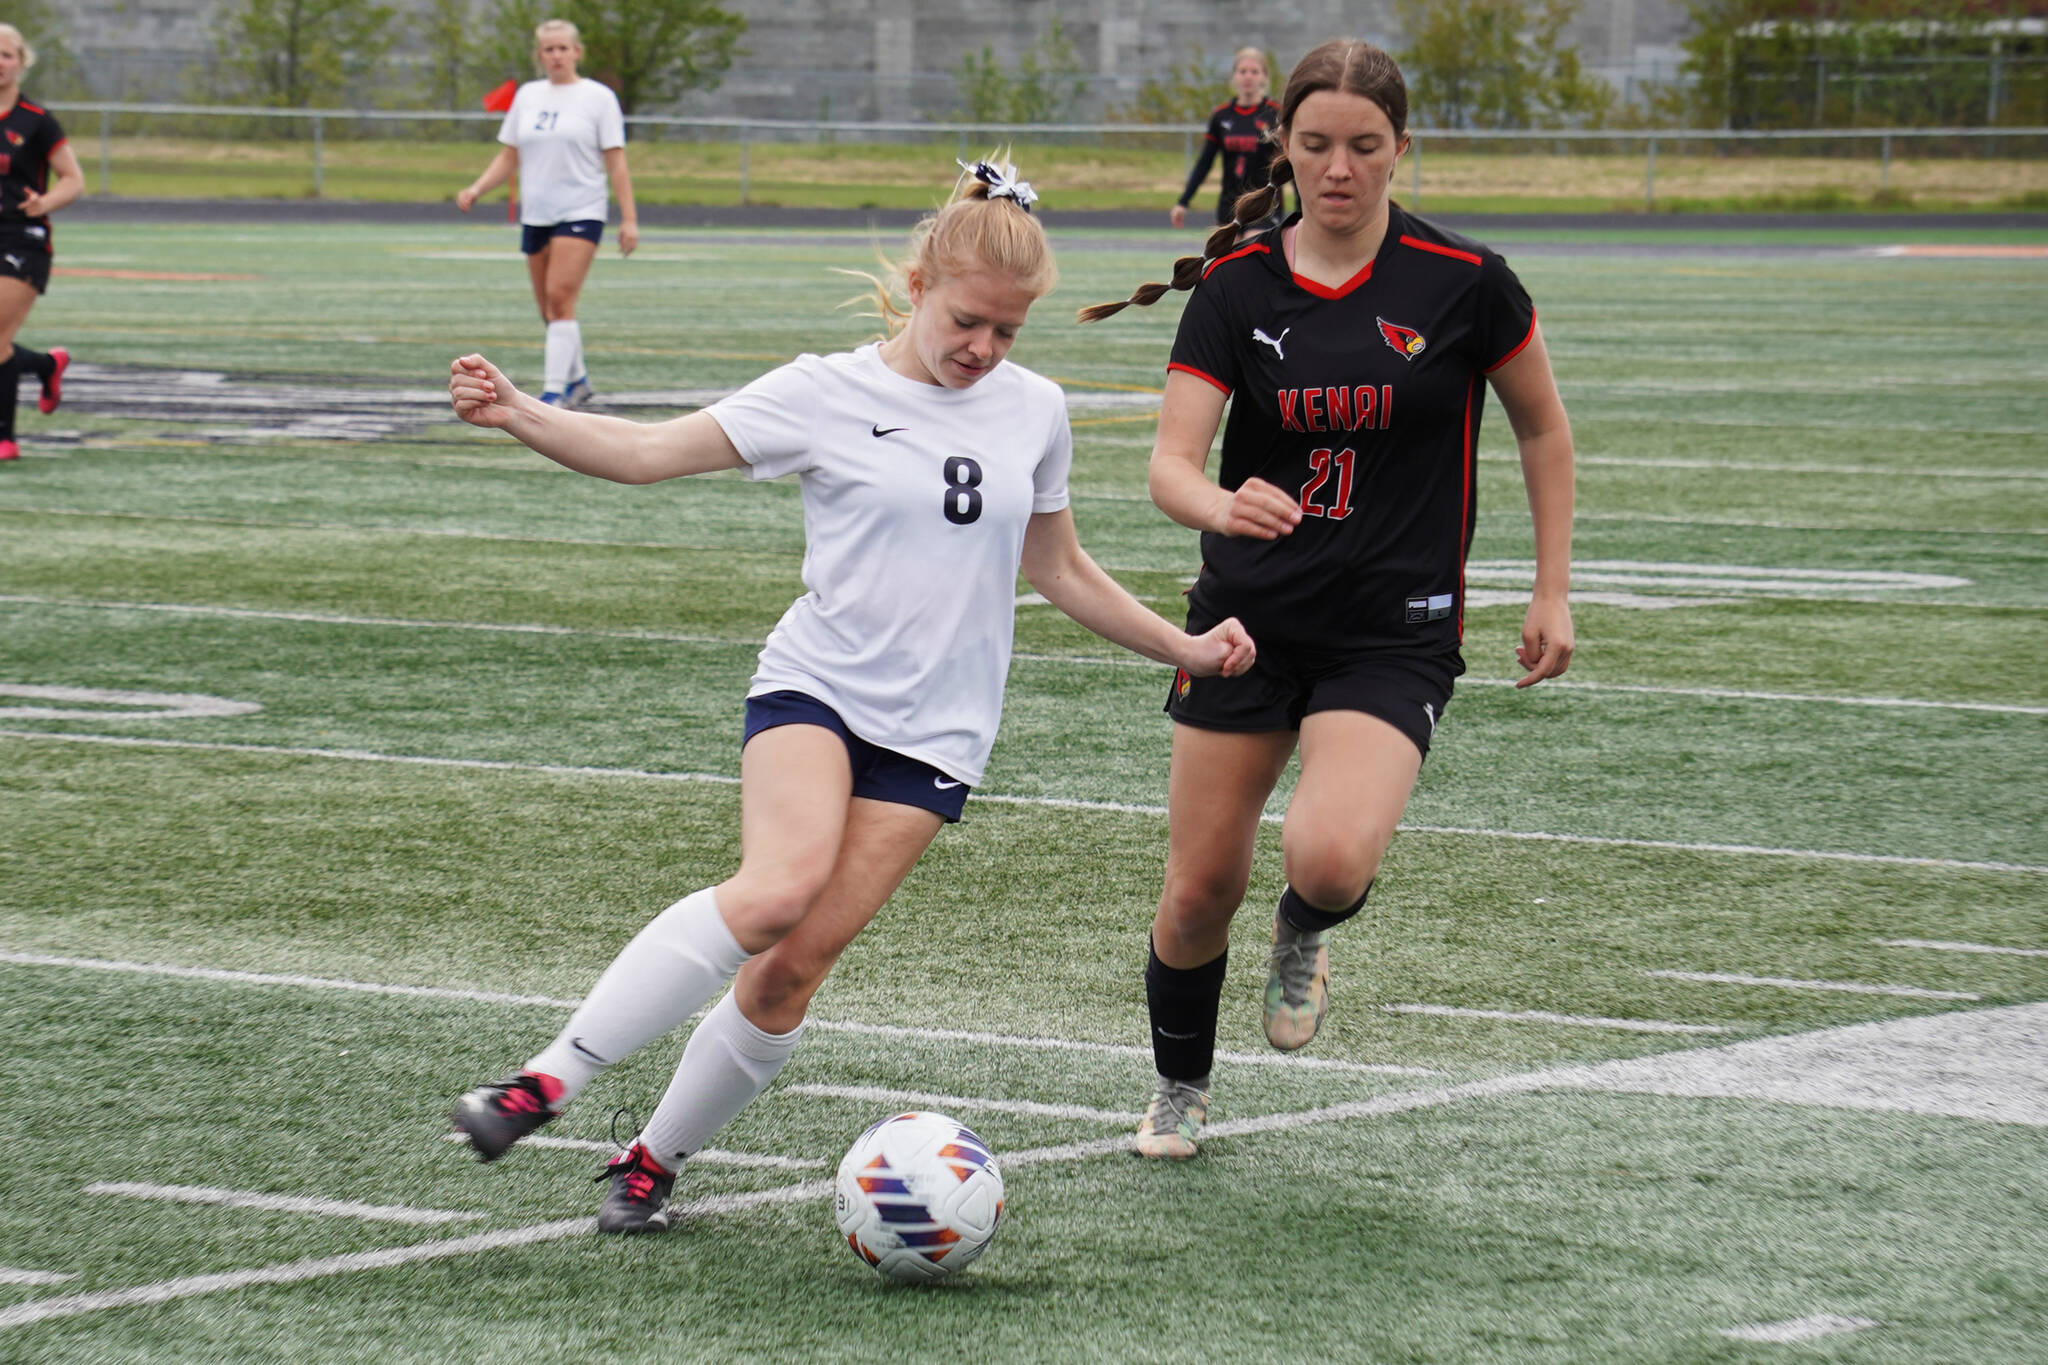 Soldotna’s Keely Sundberg battles for the ball with Kenai Central’s Ella Yragui during the Division II Soccer State Championship on Saturday, May 27, 2023, at West Anchorage High School in Anchorage, Alaska. (Jake Dye/Peninsula Clarion)